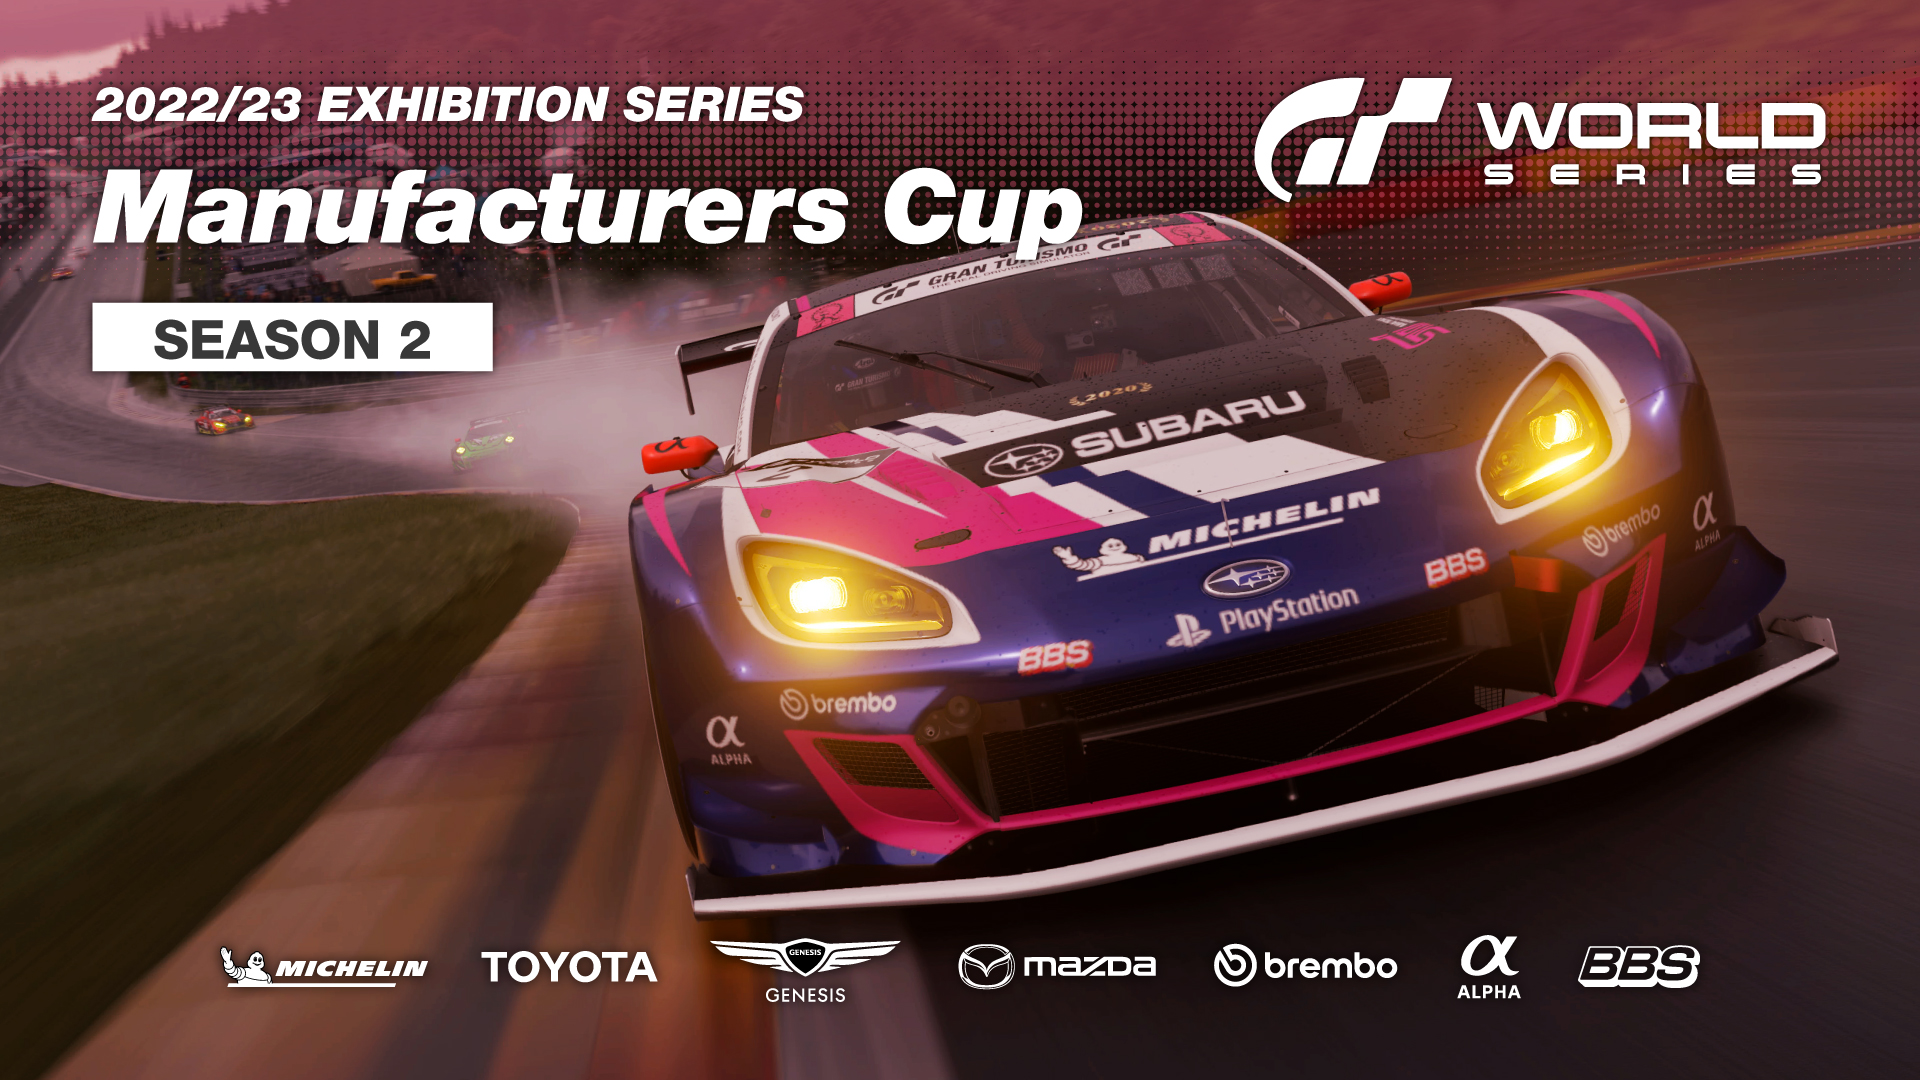 Opening of the Gran Turismo World Series Manufacturers Cup 2022/23  Exhibition Series – Season 2 